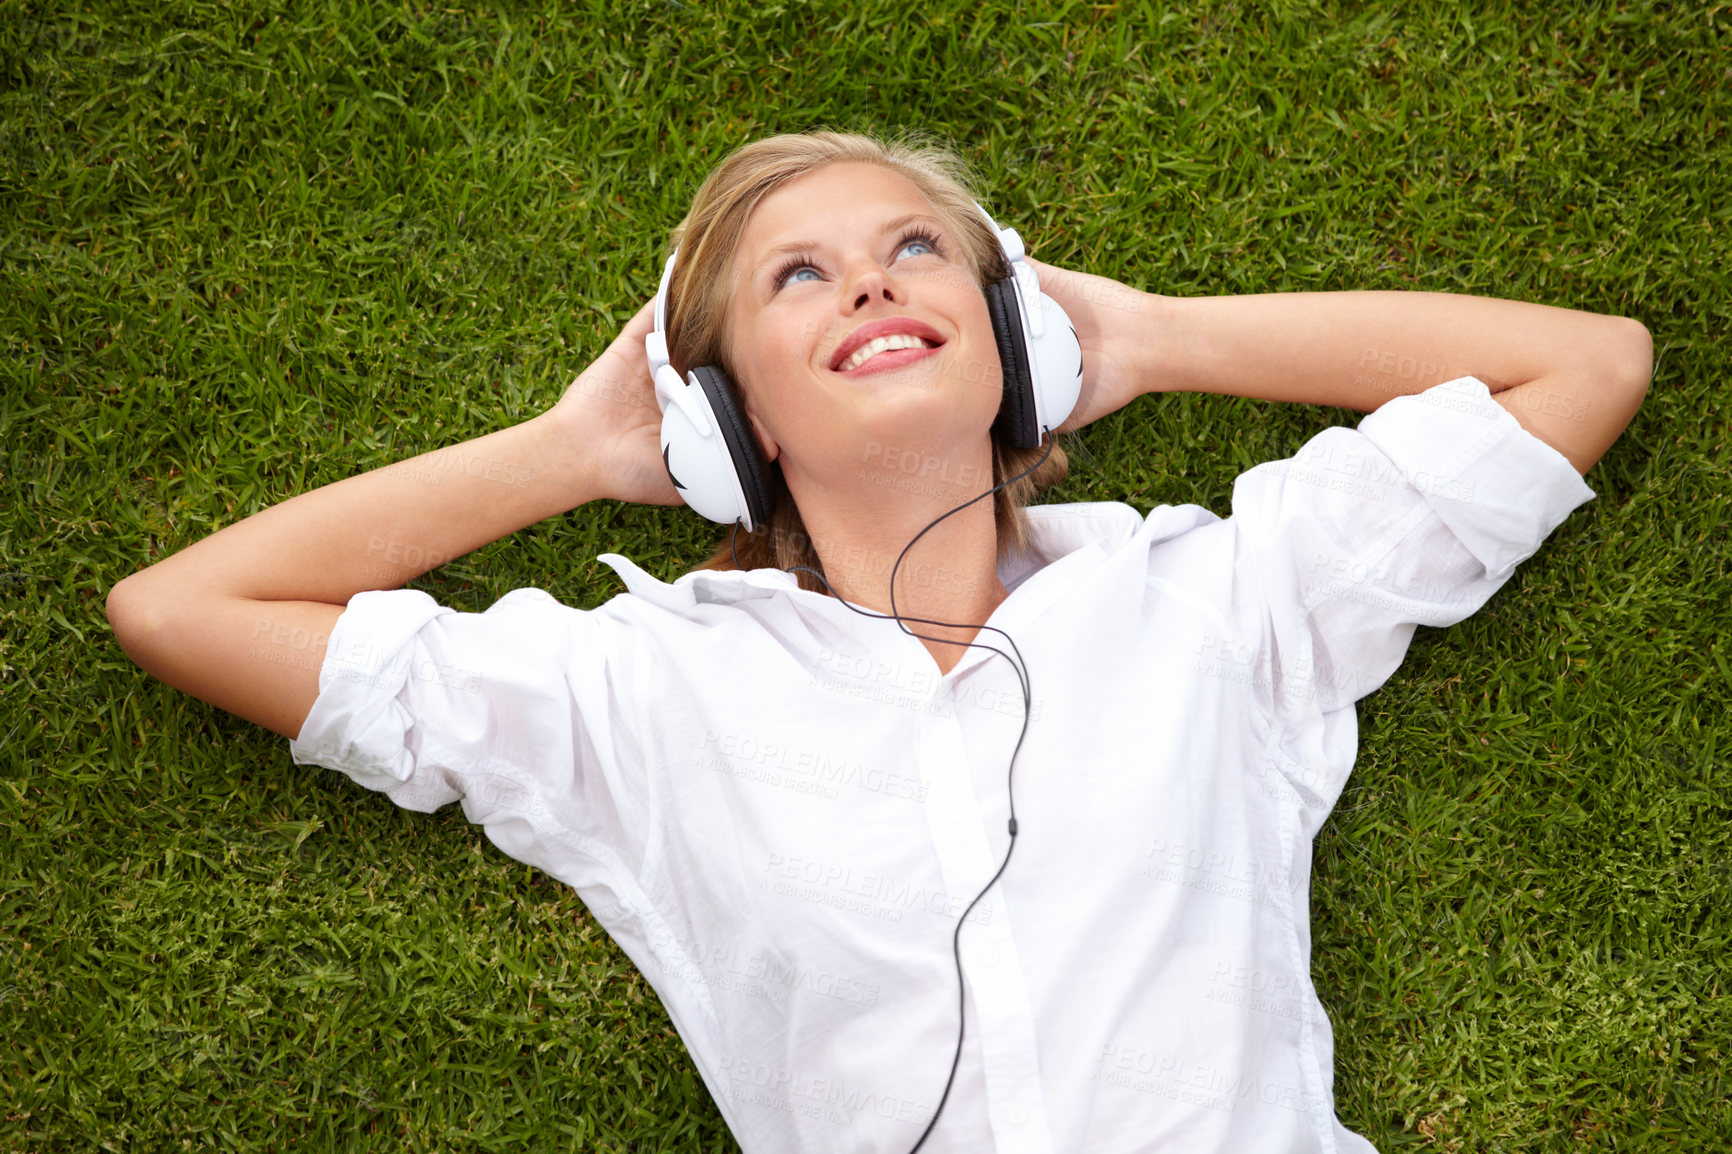 Buy stock photo High angle shot of a woman lying on a grassy field listening to musicHigh angle shot of a woman lying on a grassy field listening to music with her eyes closed